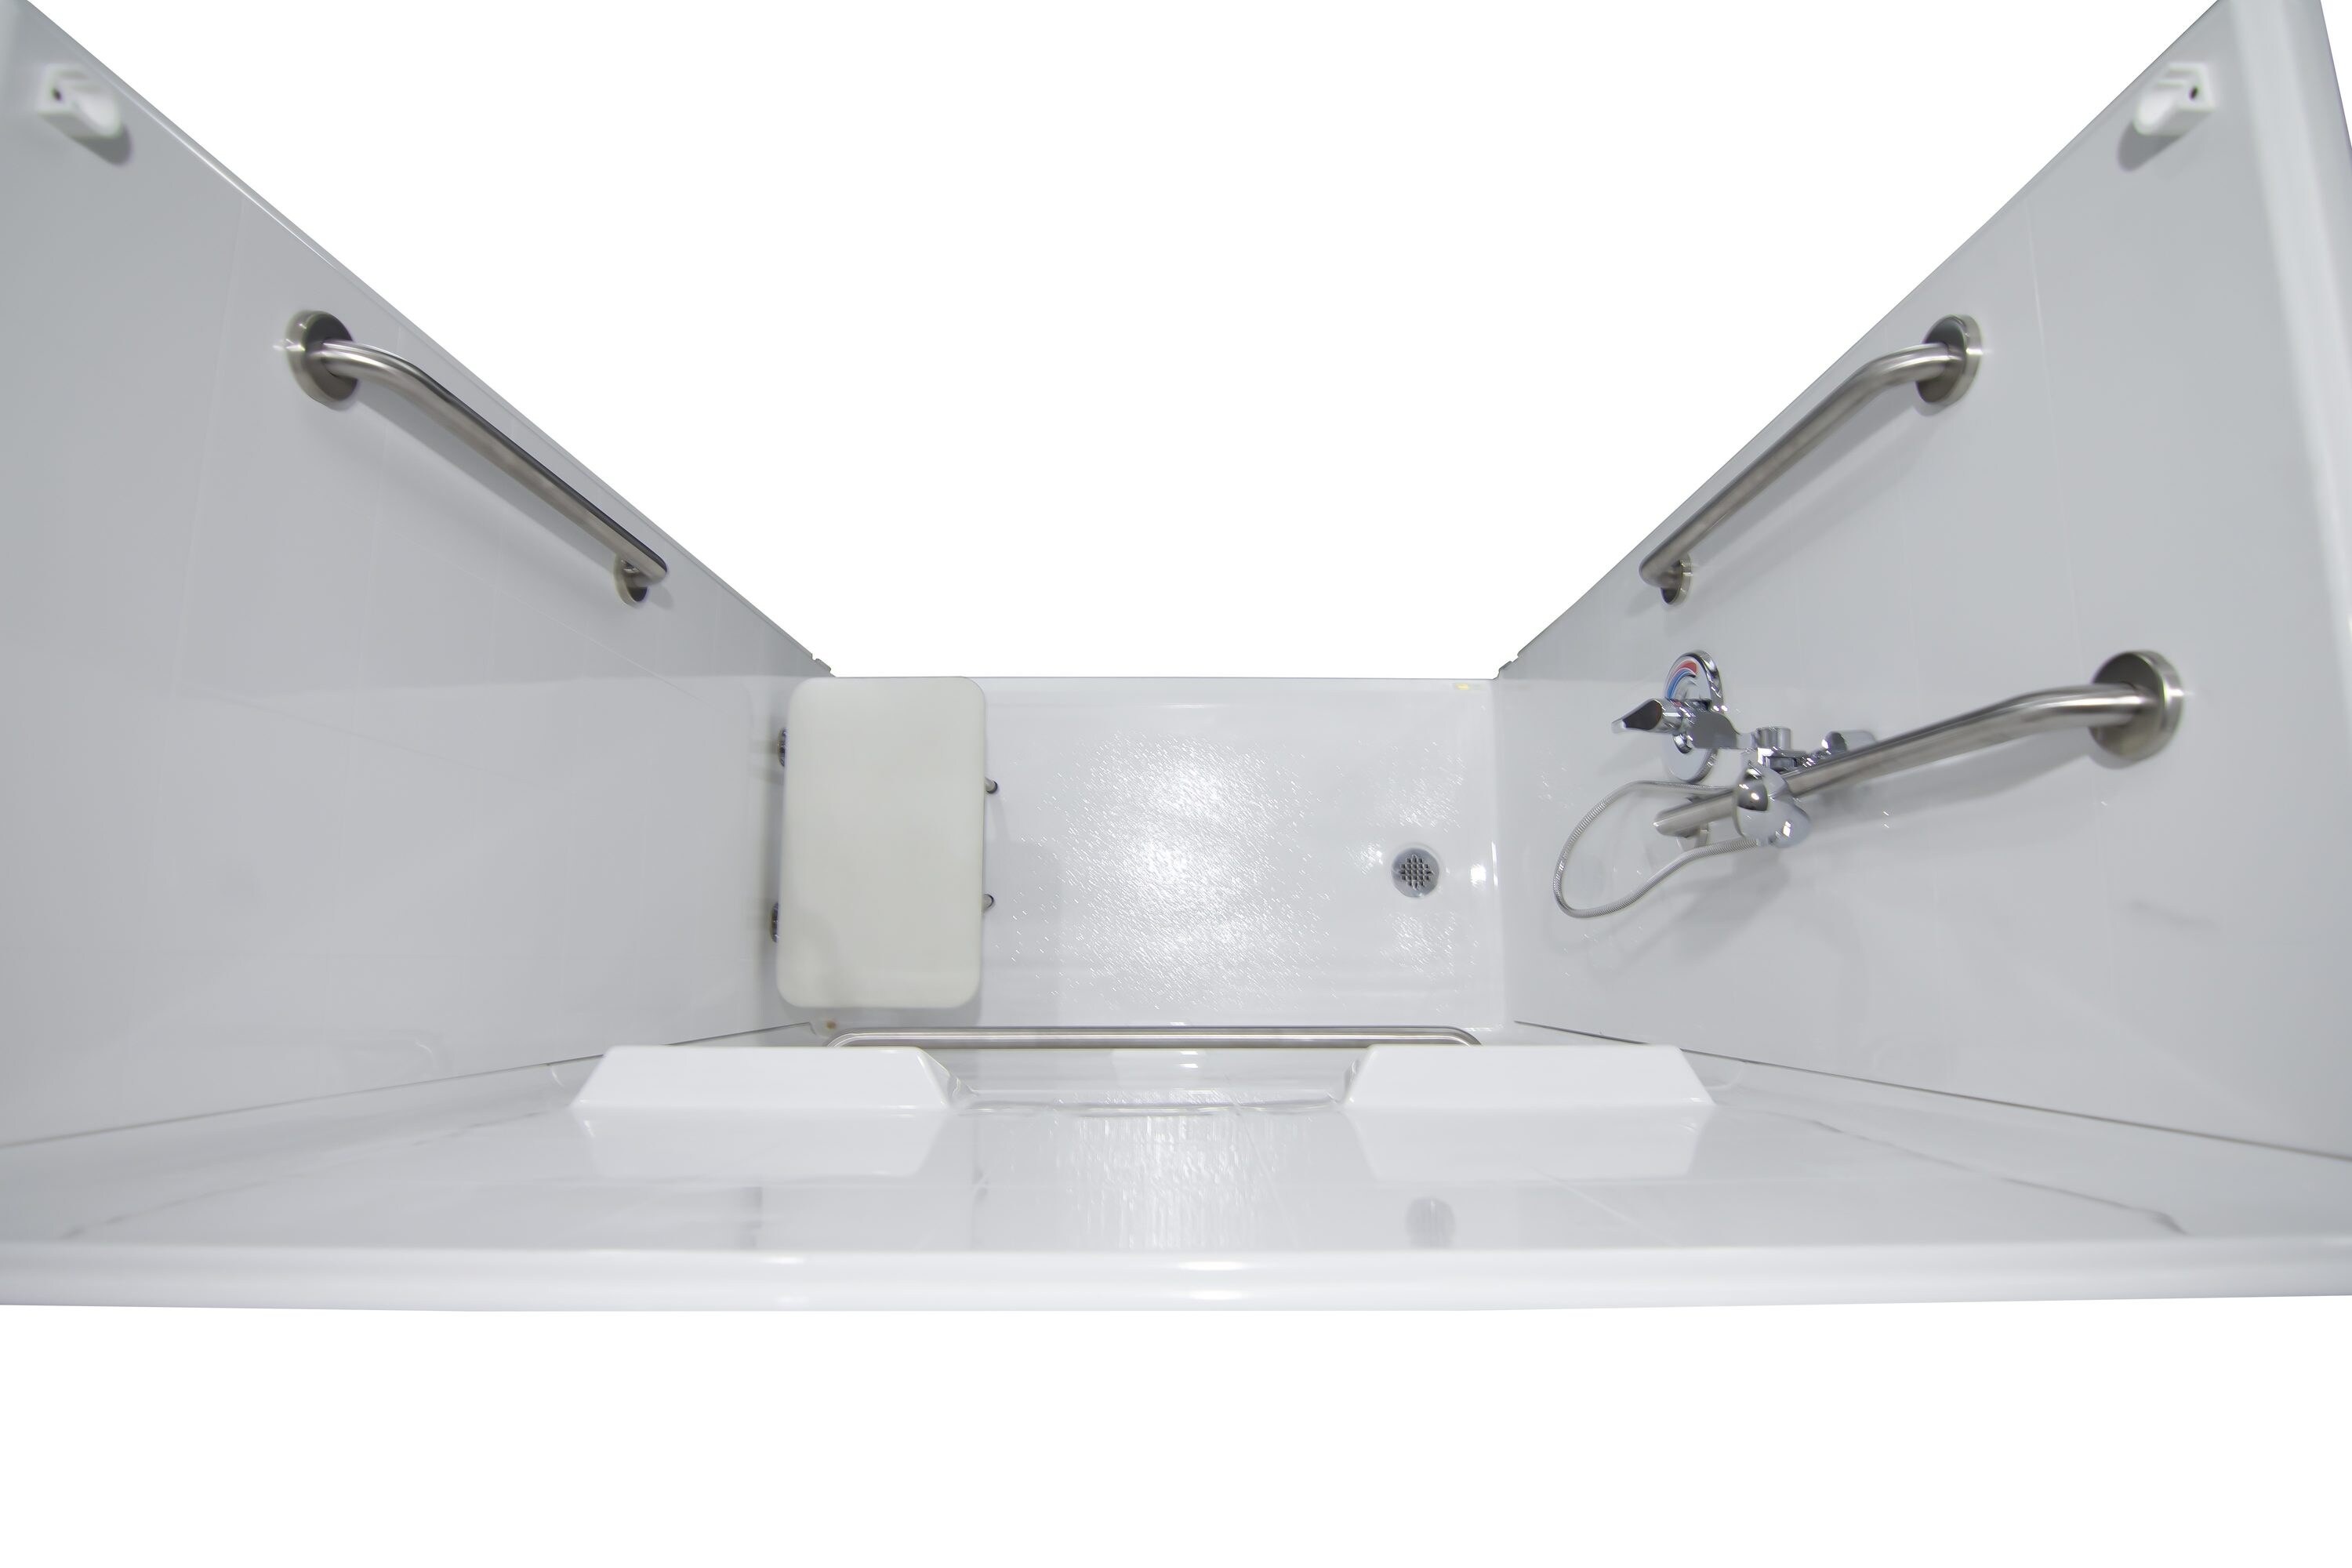 Laurel Mountain Whitwell ADA Roll-In Zero Threshold- Barrier Free White 33-in x 62-in x 78-in Base/Wall One-Piece Shower Kit with Folding Seat